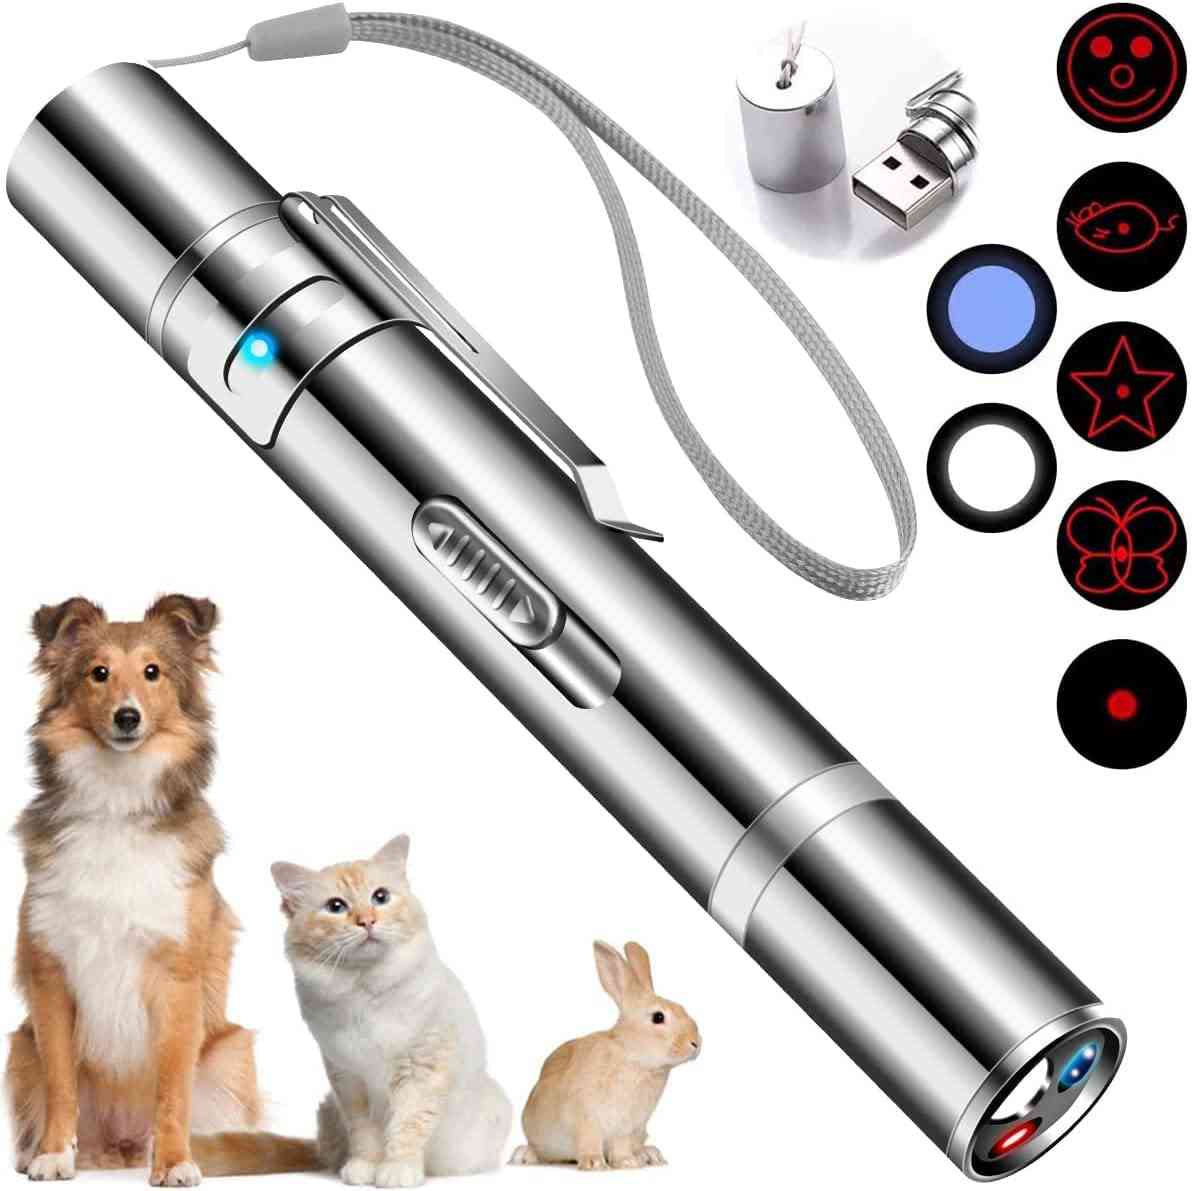 Cyahvtl Laser Pointer, Cat Toys for Indoor Cats, Kitten Dog Laser Pen Toy, Red Dot LED Light Pointer Interactive Toys for Indoor Cats Dogs, USB Charging, 5 Switchable Patterns